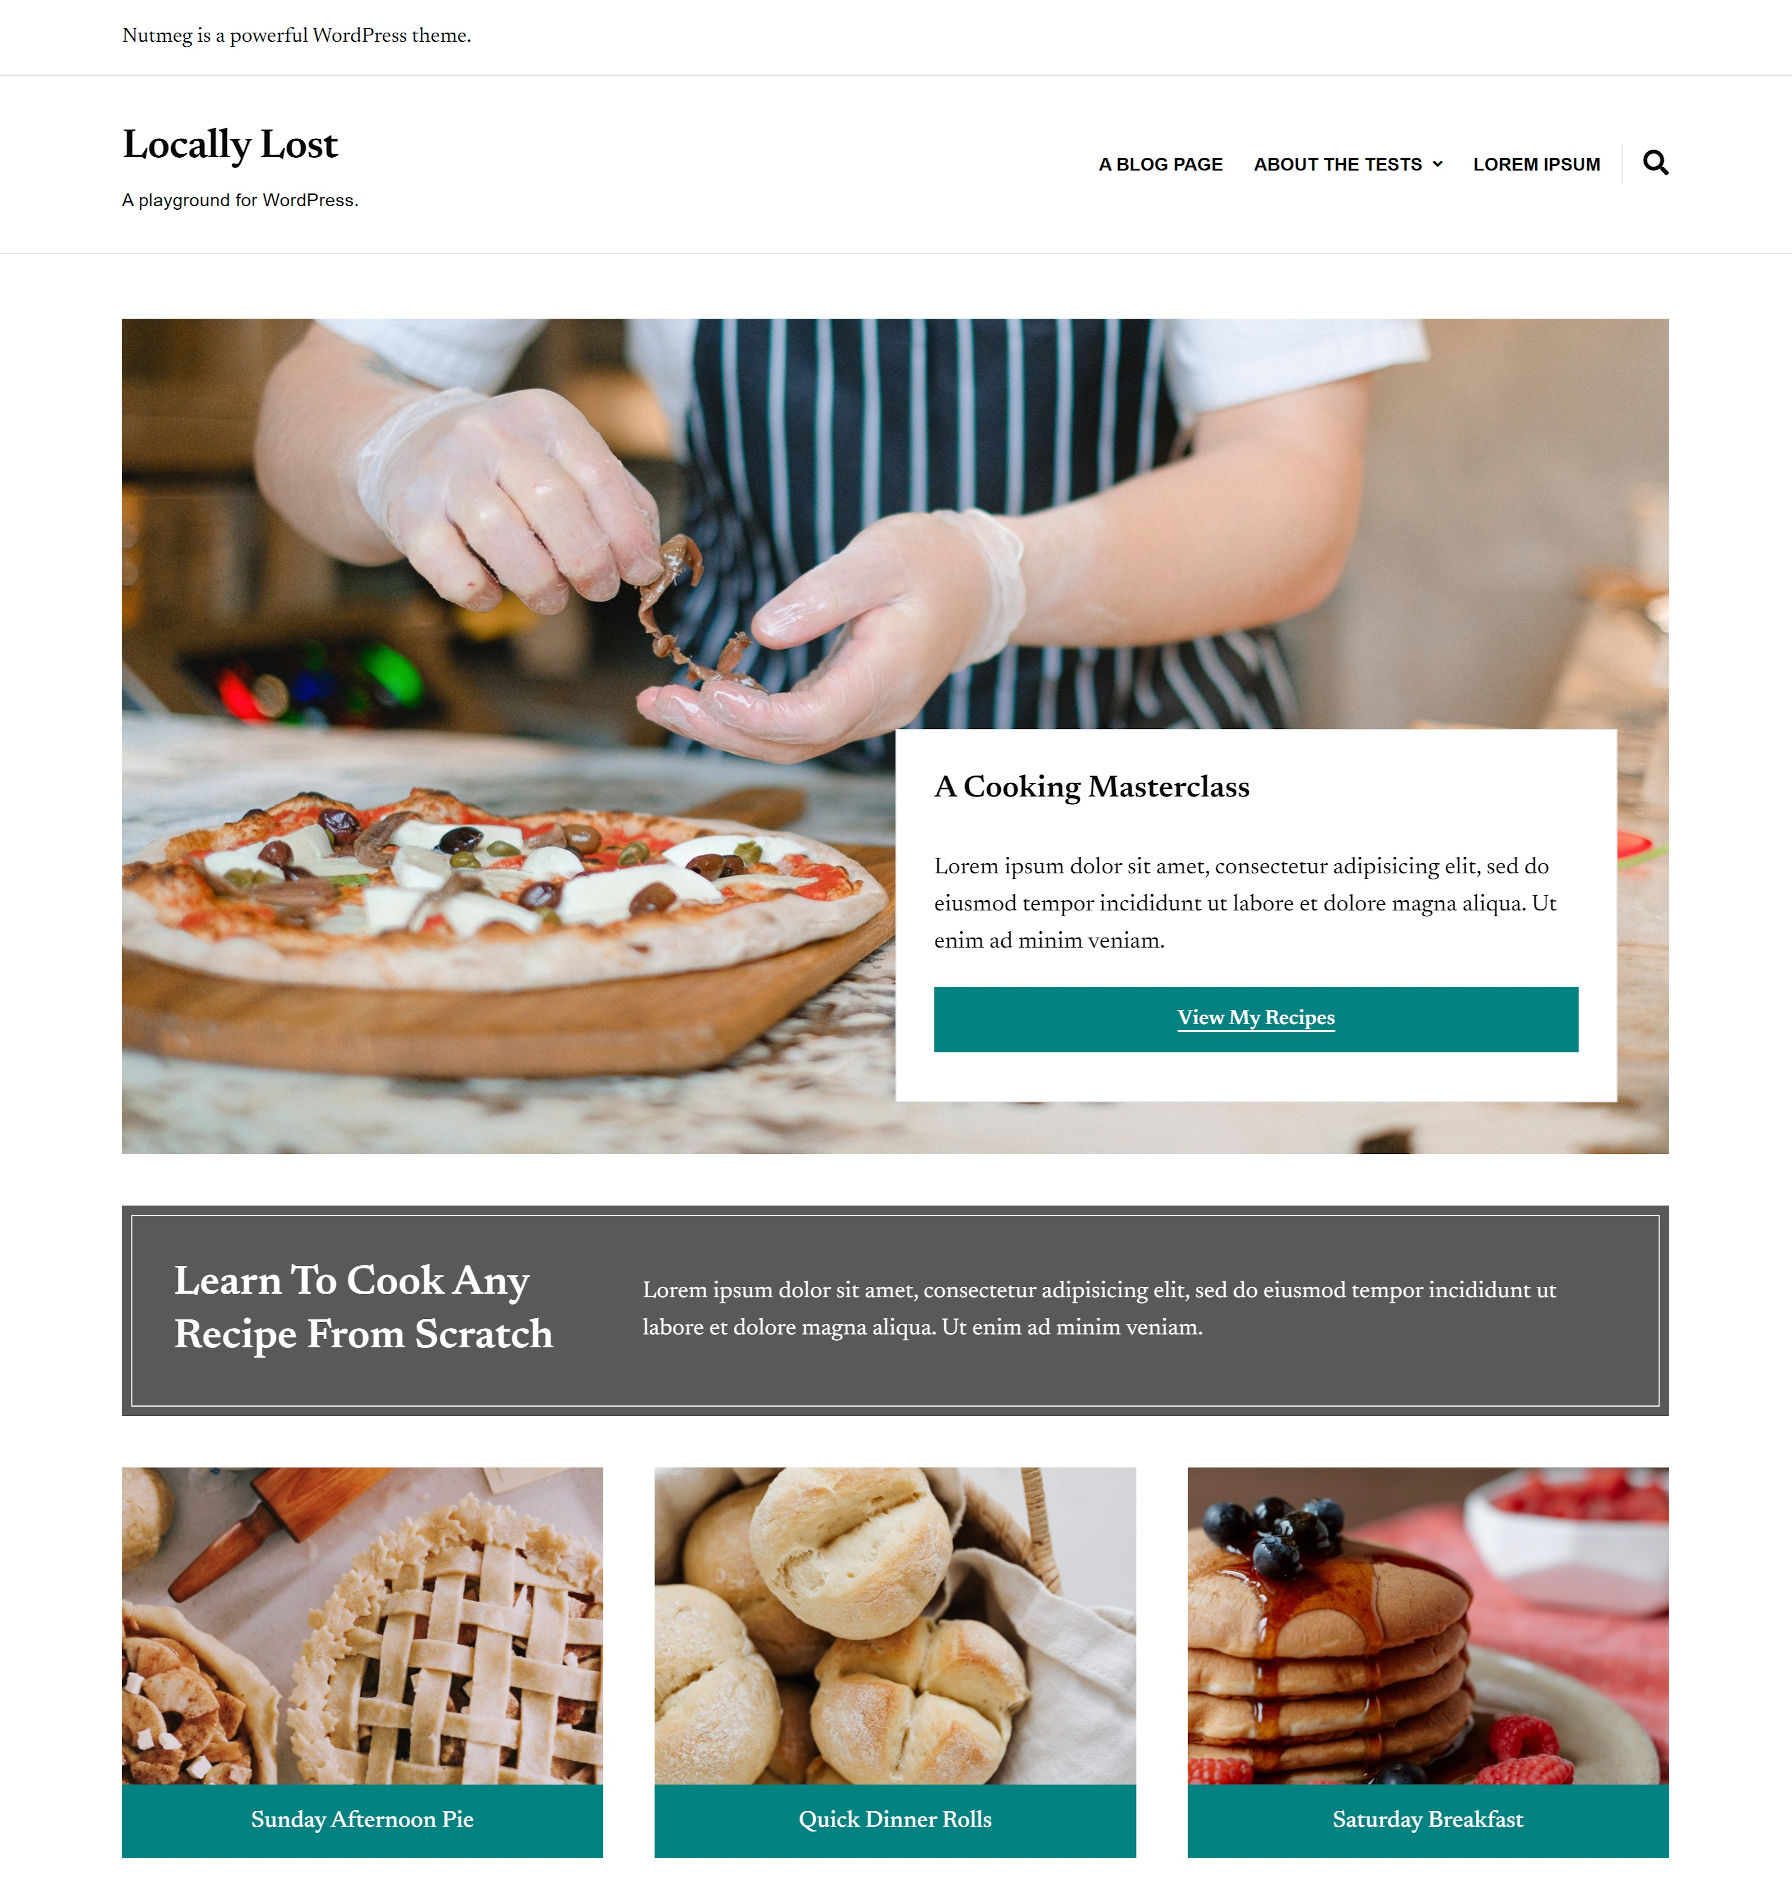 Screenshot of a recipe blog homepage built with Nutmeg's block patterns.